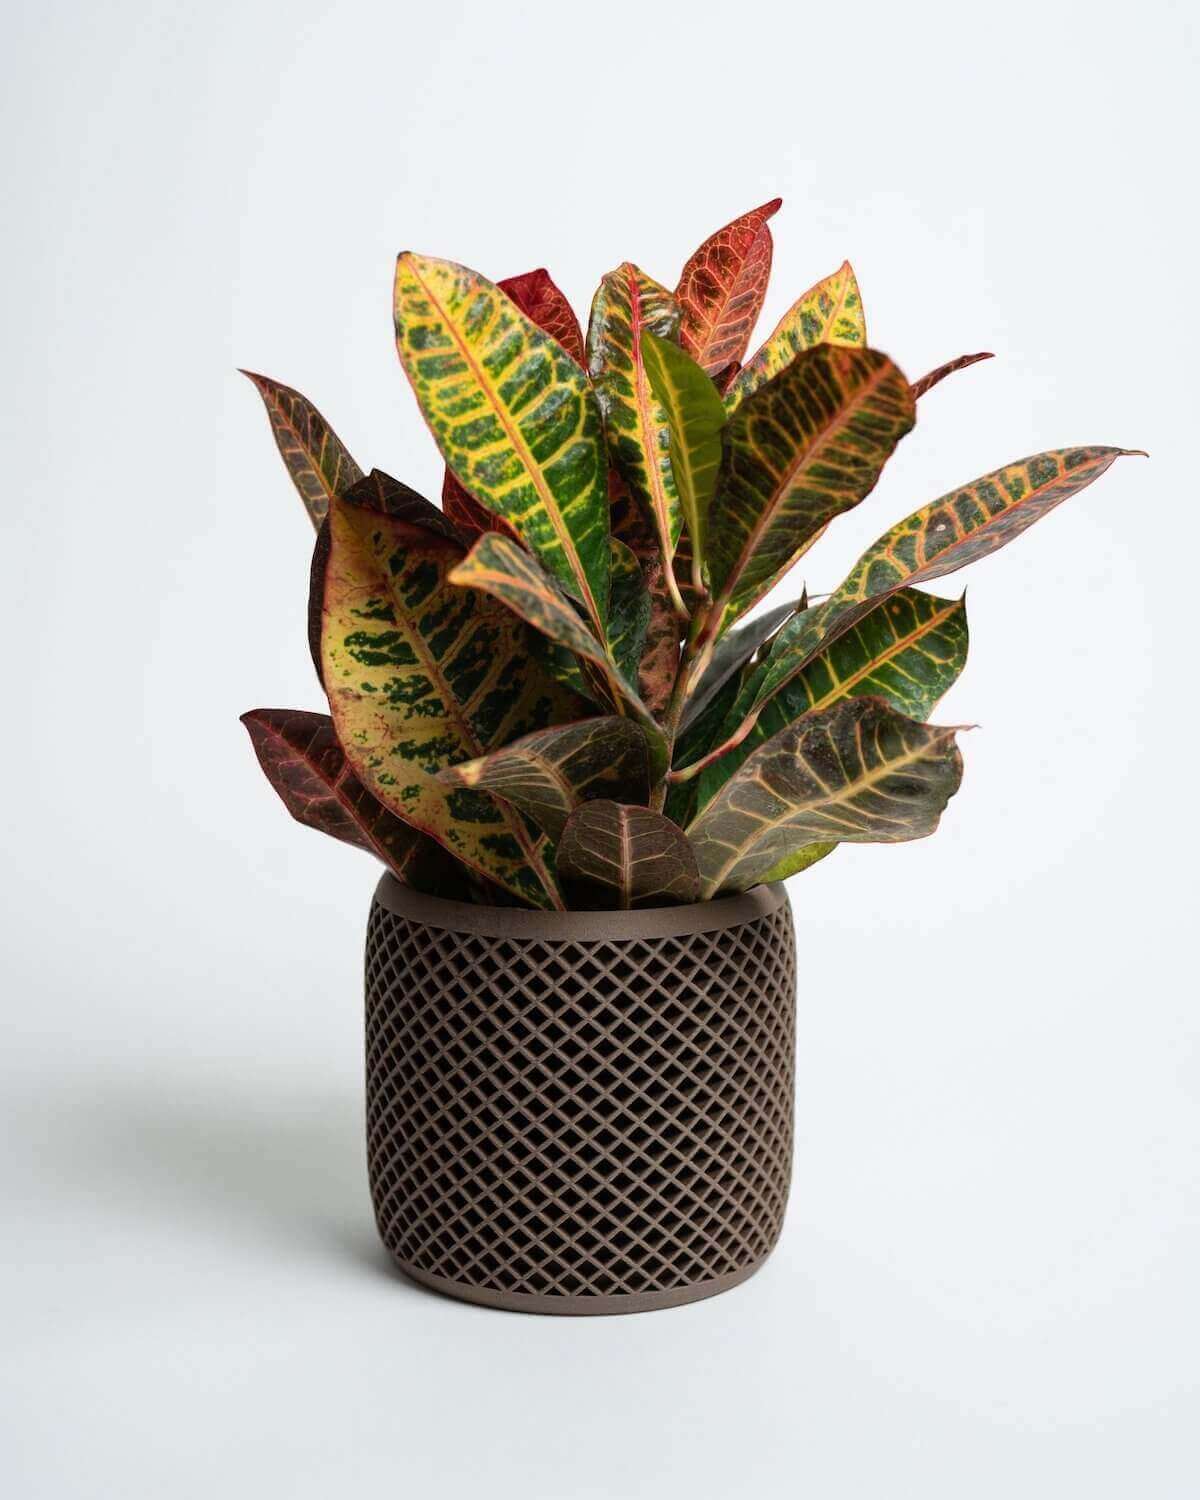 Unique Planters | Modern planters | Decor Planters from Woodland Pulse. A brown geometric planter with a very colorful plant.